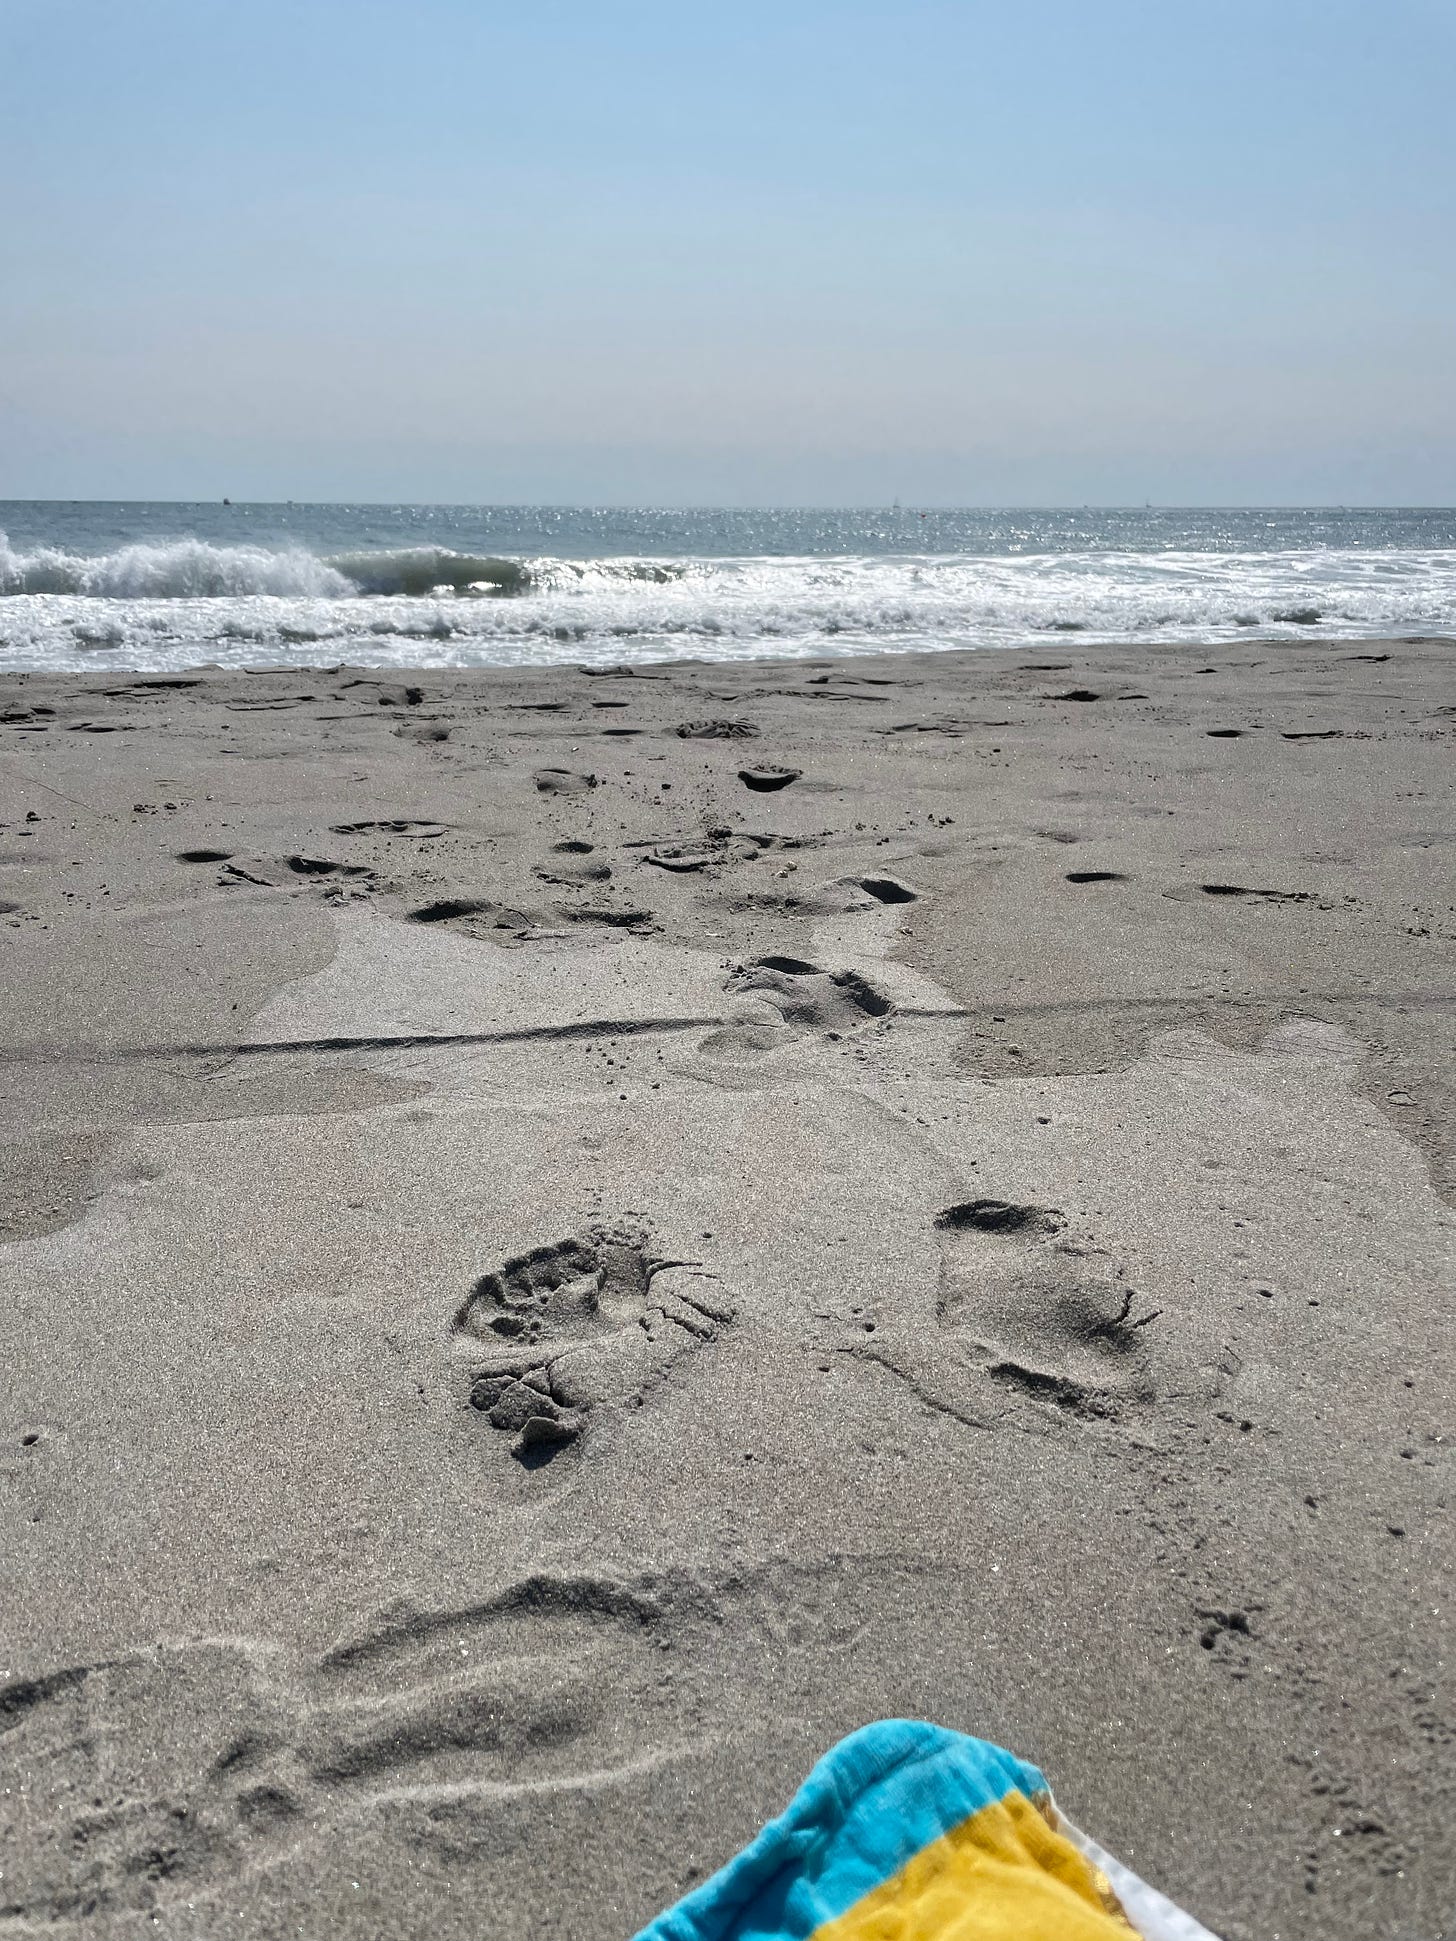 It is a day with blue clear skies. In the background, rushing waves can be seen. In the foreground, the edges of a beach towel can be seen as footprints on a sandy beach lead out to shore.